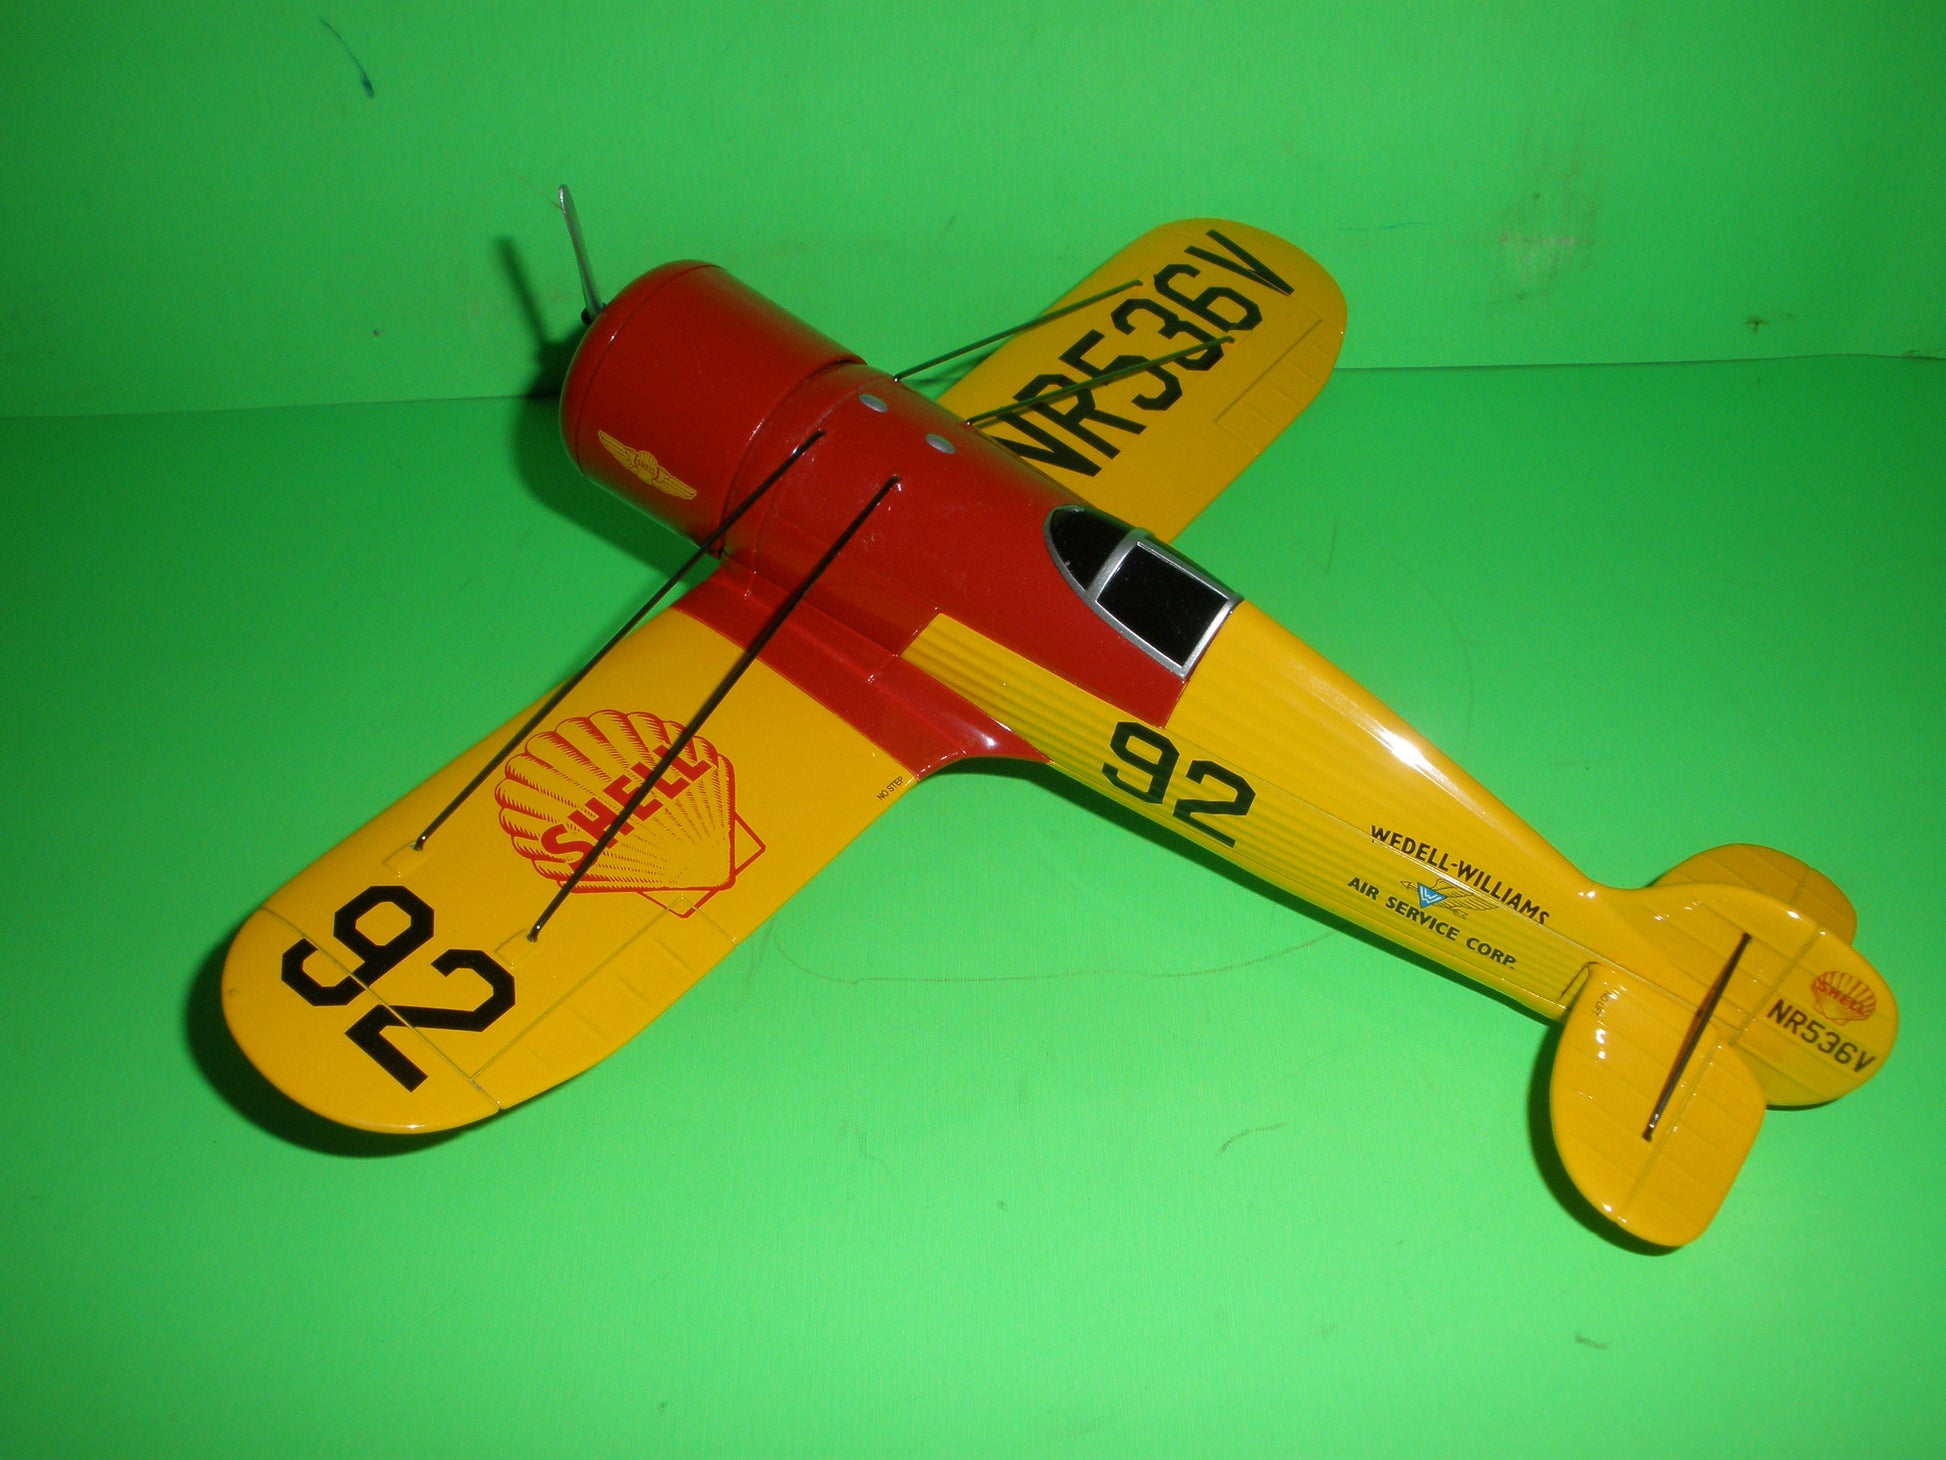 Shell Wedell Williams Racer Airplane